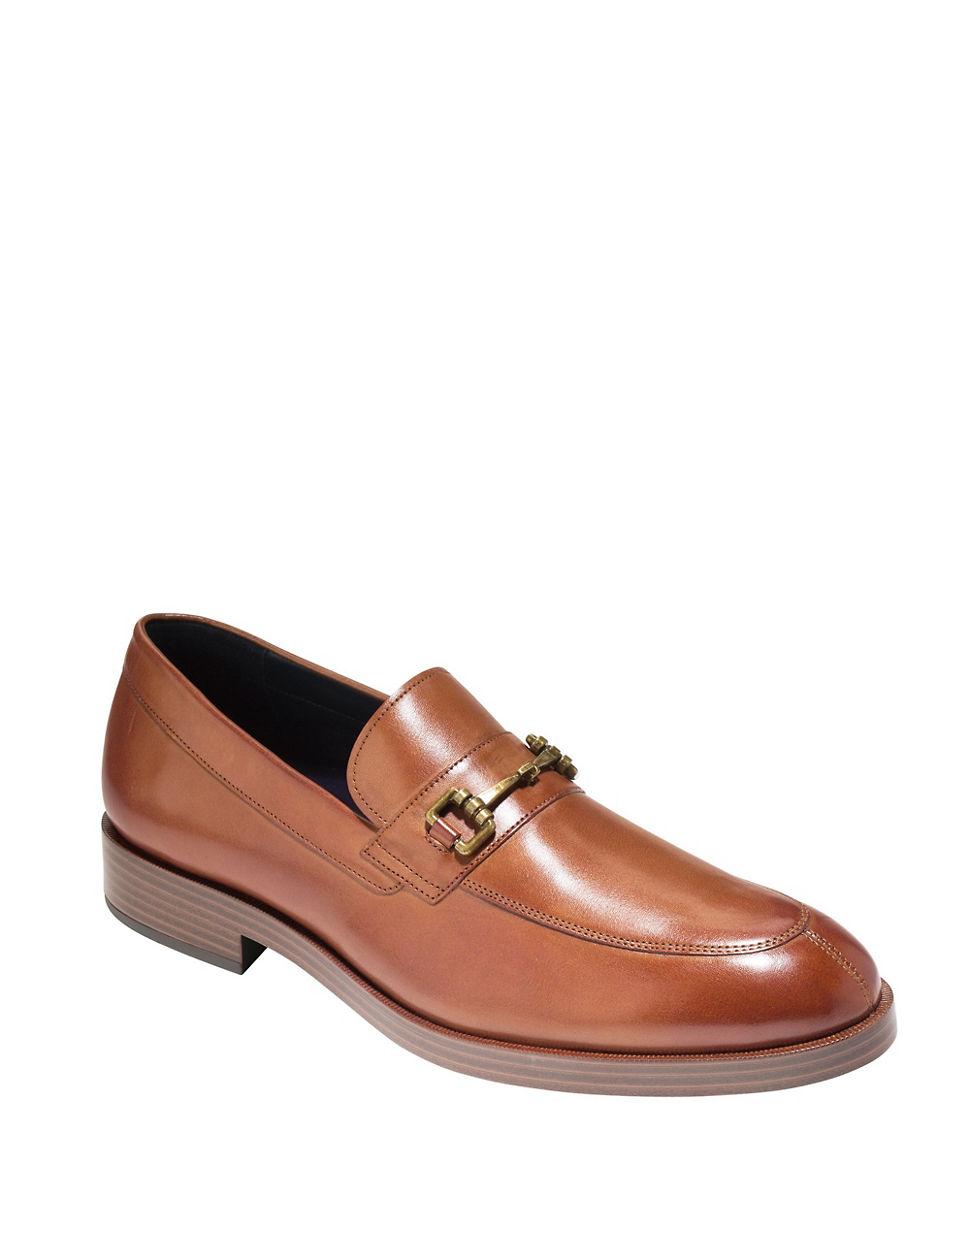 Cole haan Dress Revolution Henry Grand Leather Horse-bit Loafers in ...